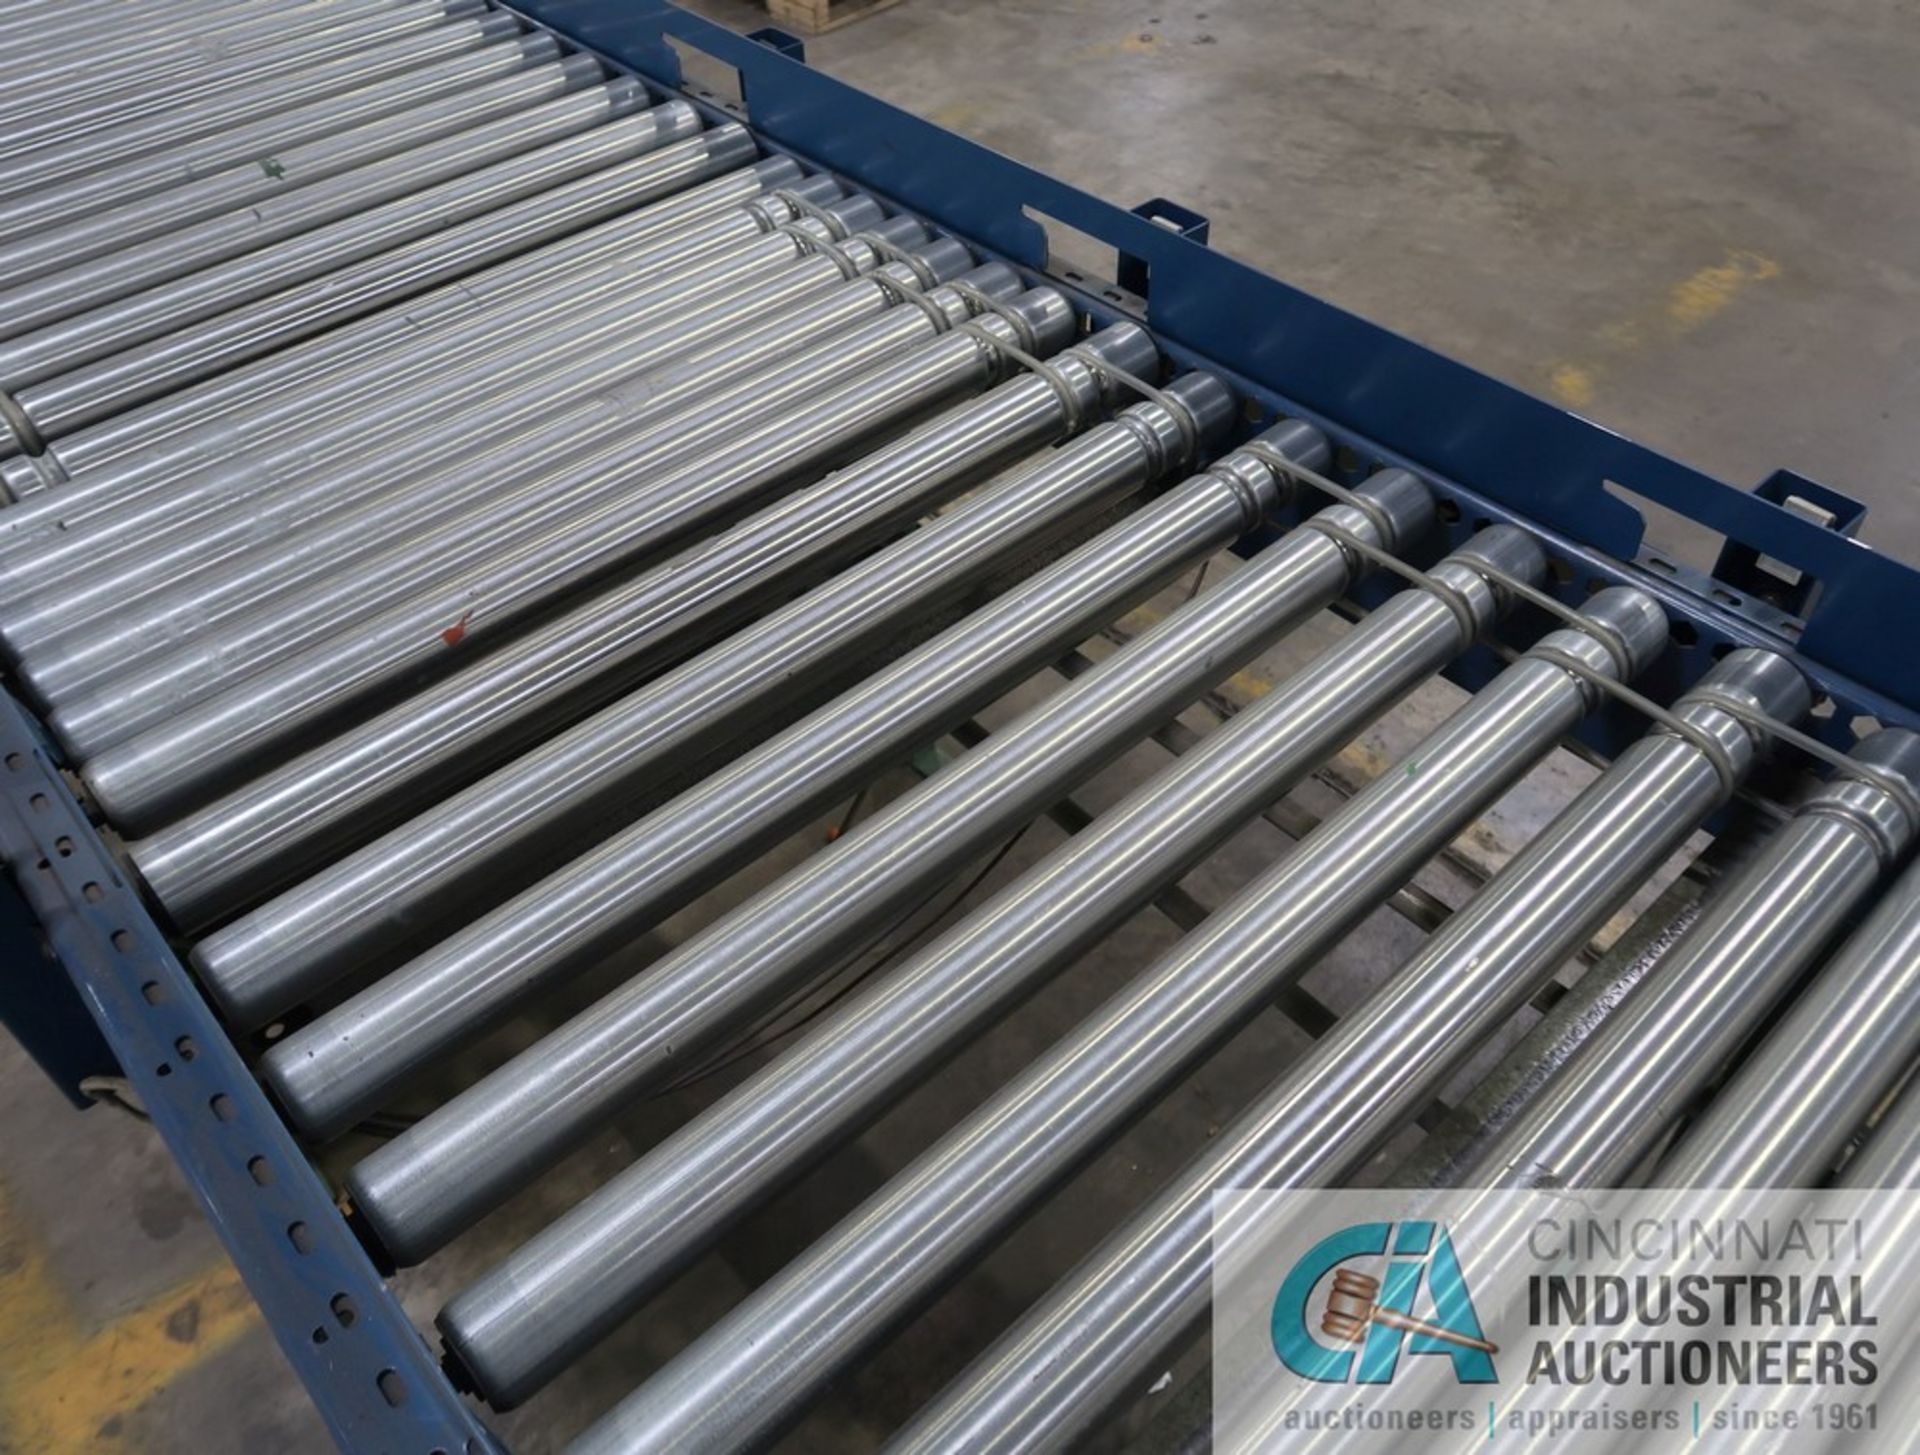 26" WIDE X 120' LONG AUTOMOTION ADJUSTABLE HEIGHT POWER ROLLER CONVEYOR WITH (1) SECTION 22" X 10' - Image 5 of 14